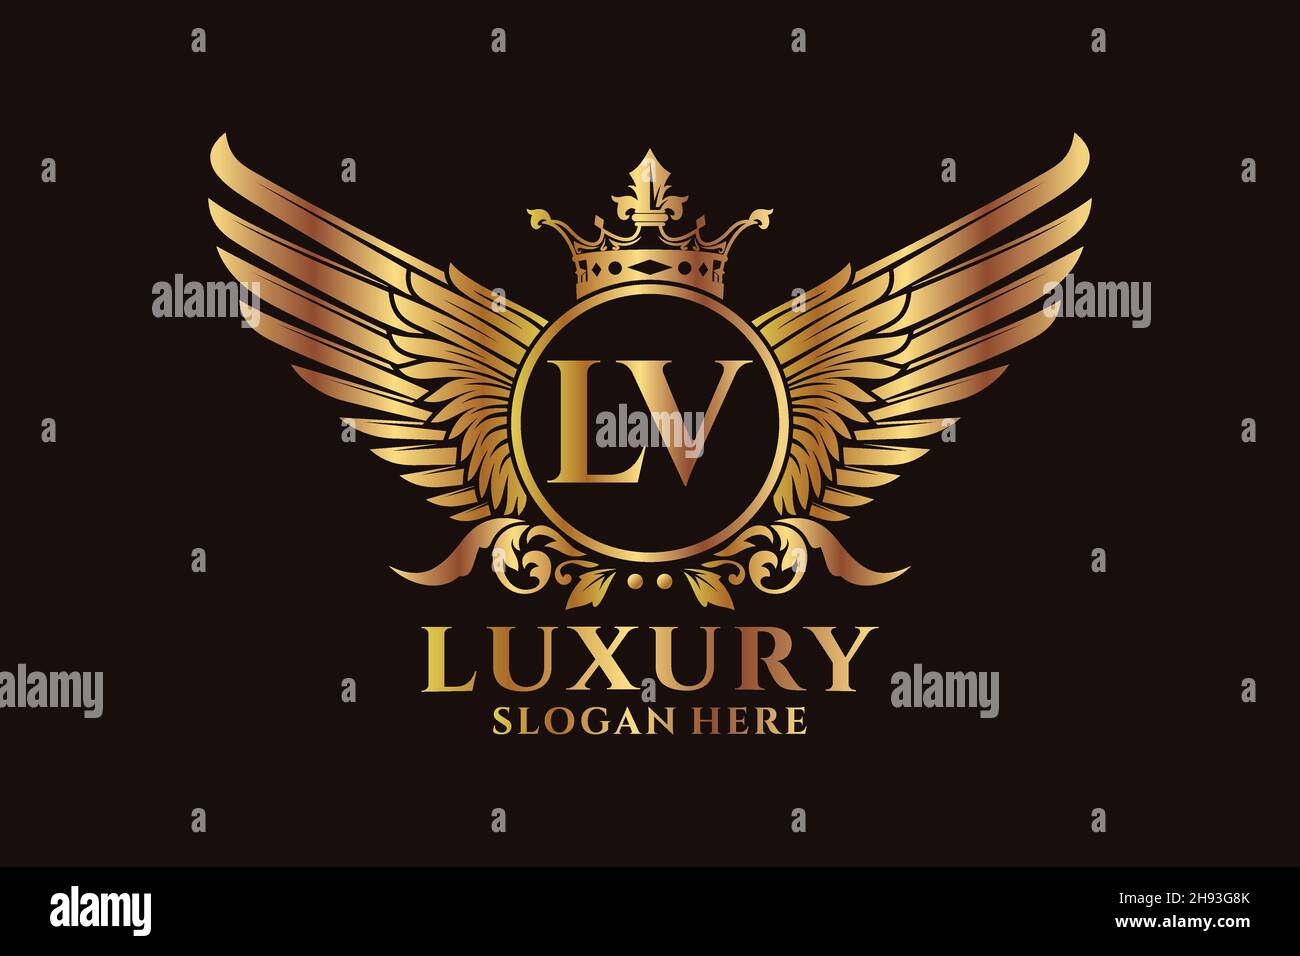 Letter LV logo with Luxury Gold template. Elegance logo vector